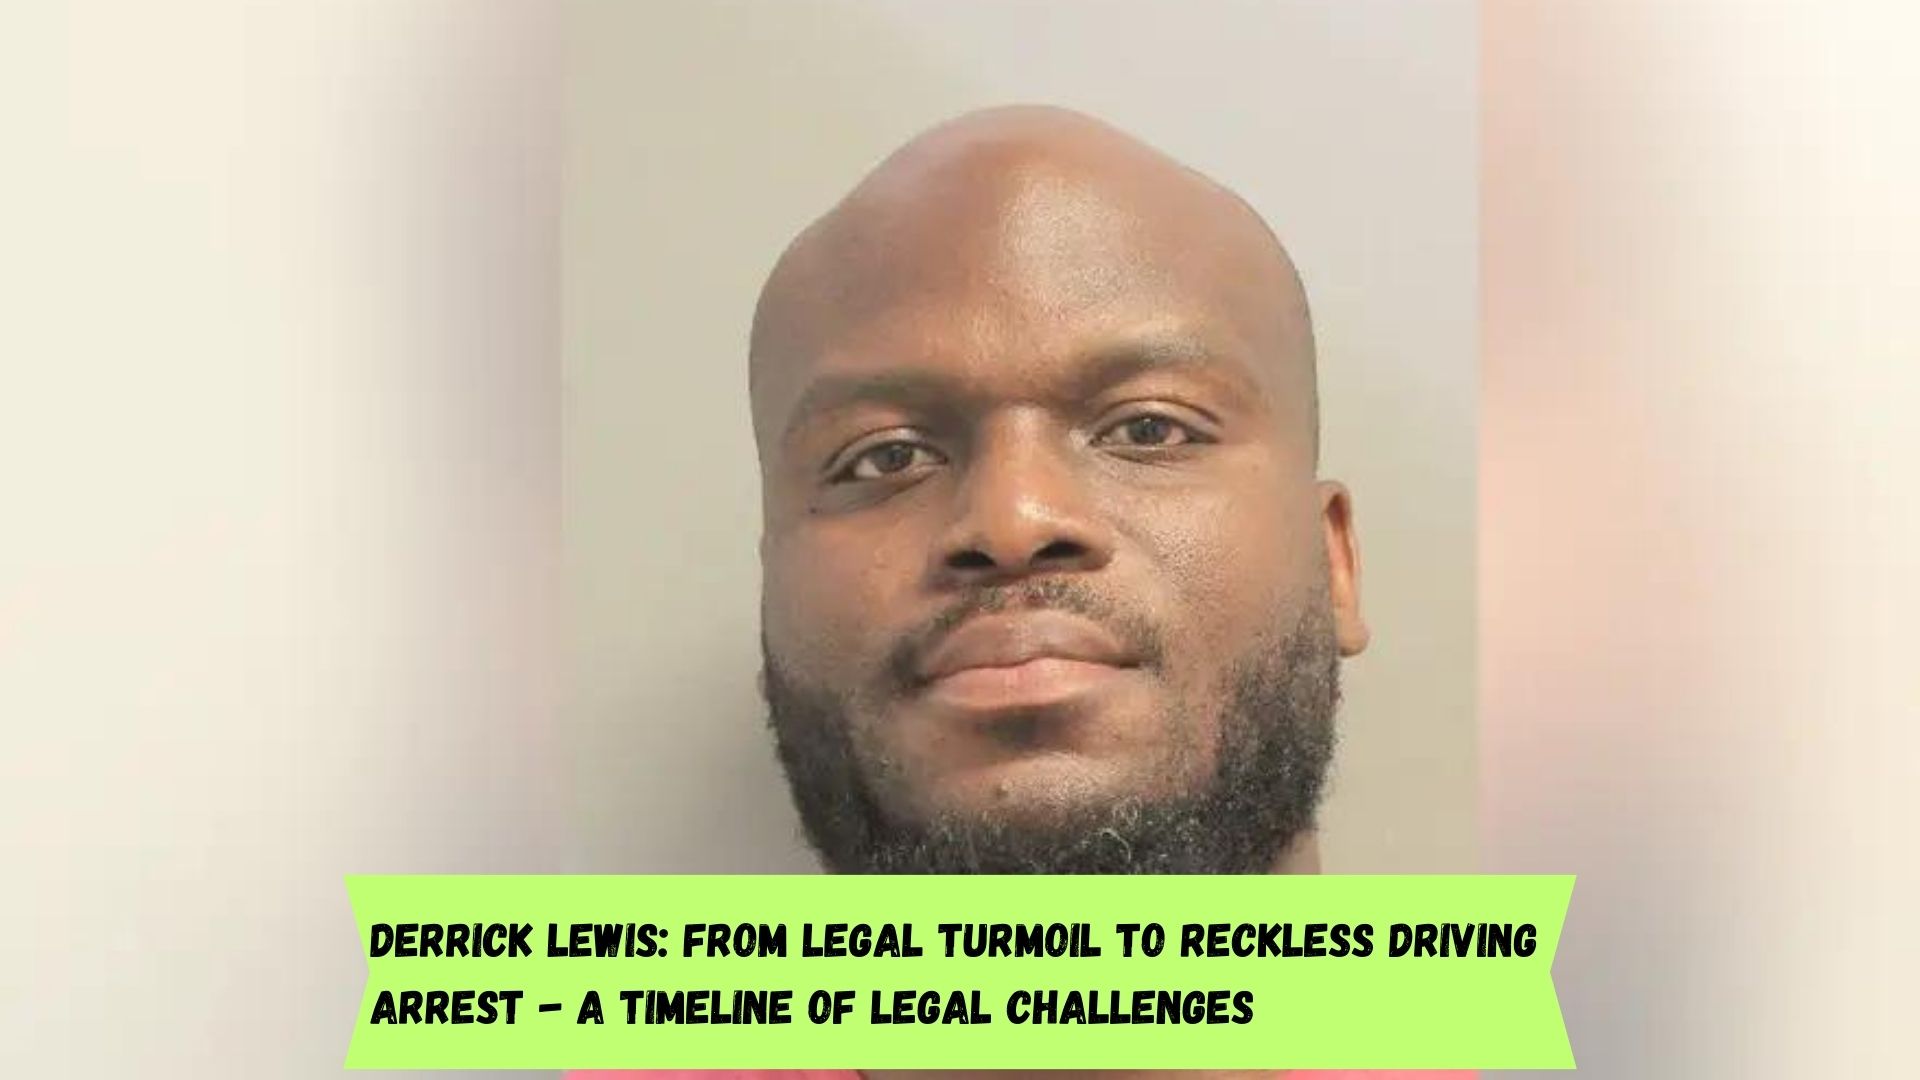 Derrick Lewis: From Legal Turmoil to Reckless Driving Arrest - A Timeline of Legal Challenges